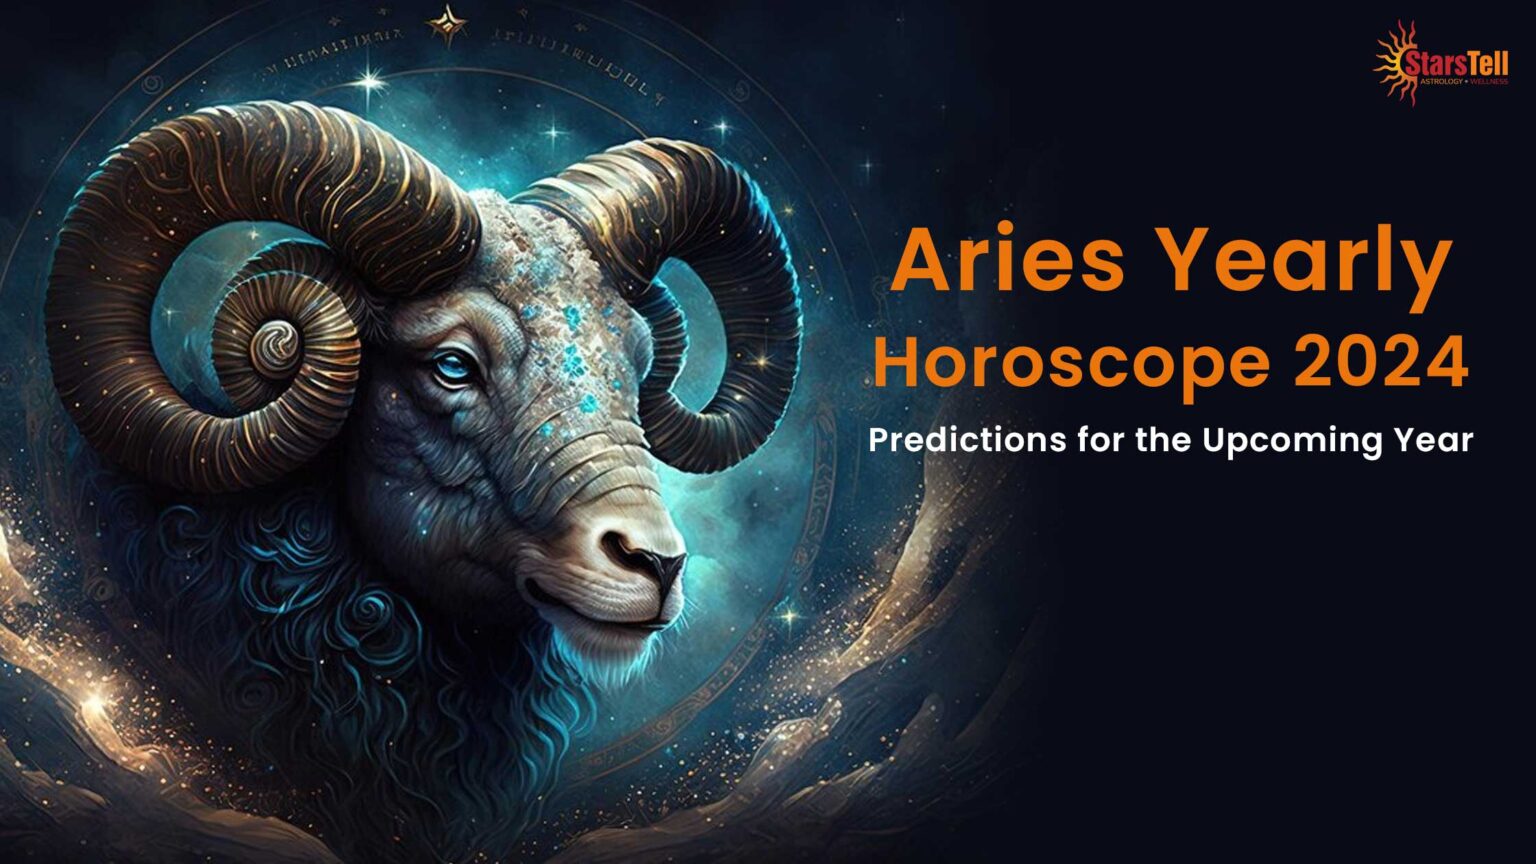 Aries Yearly Horoscope 2024 Predictions for the Year